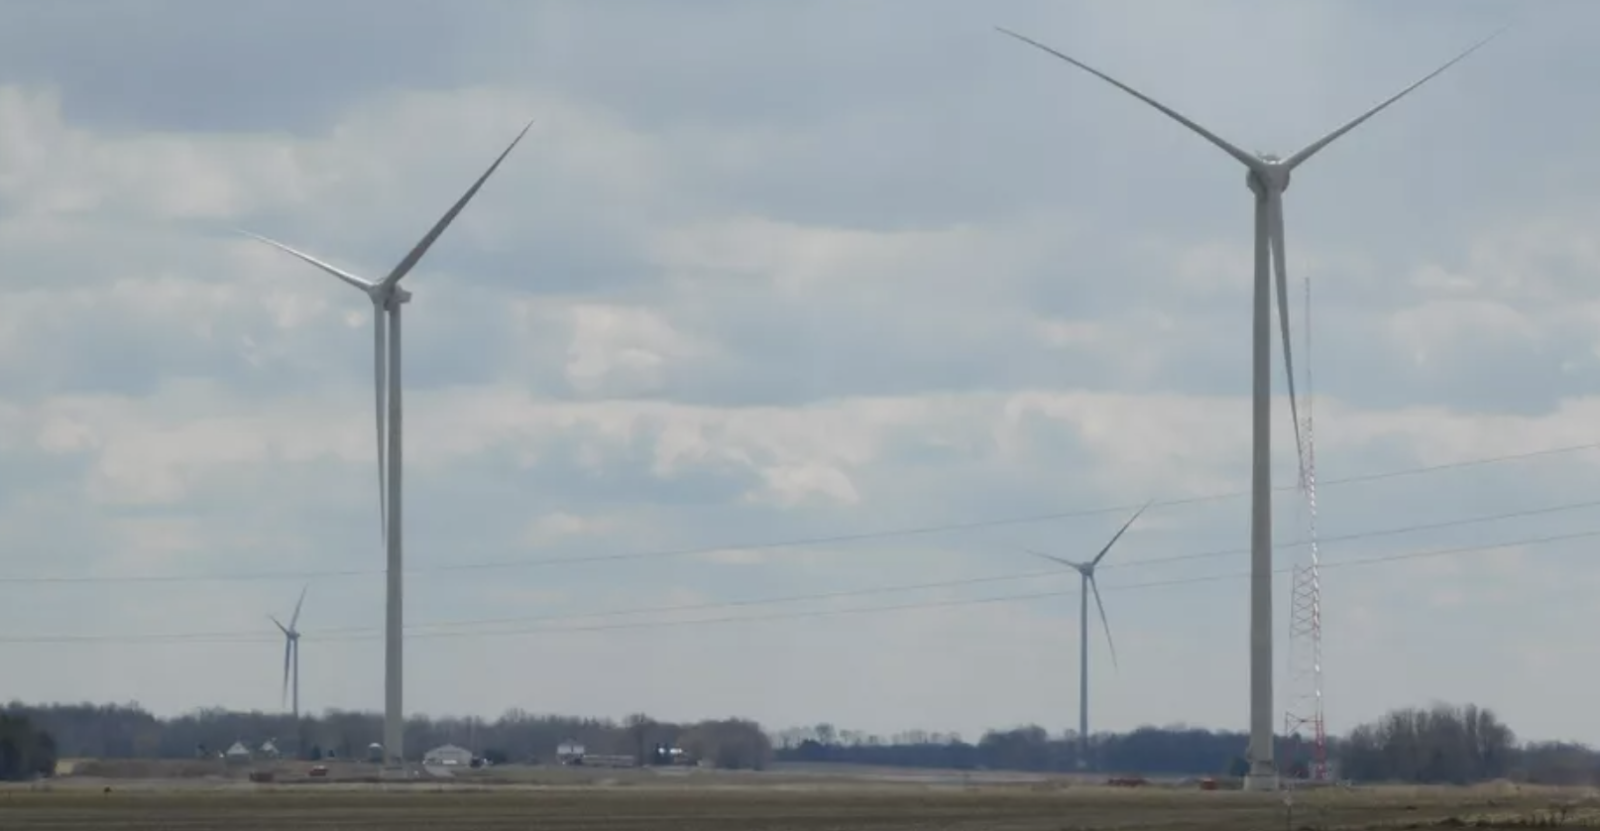 Turbines spin again for Nation Rise wind farm project